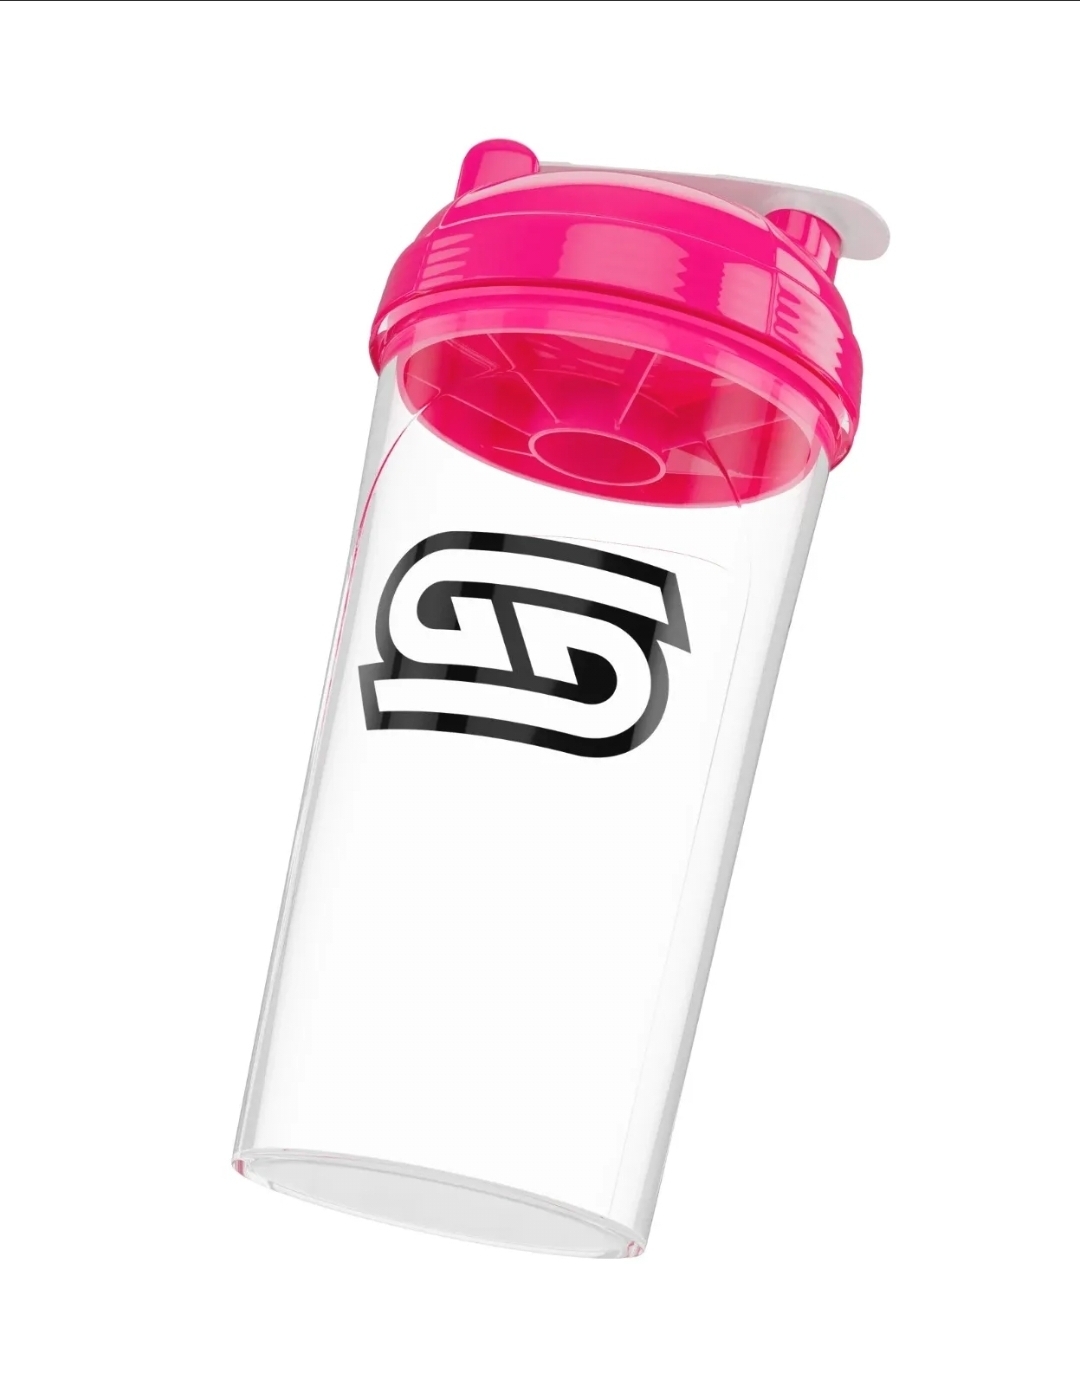 GAMER SUPPS - Shaker And Sample Pack